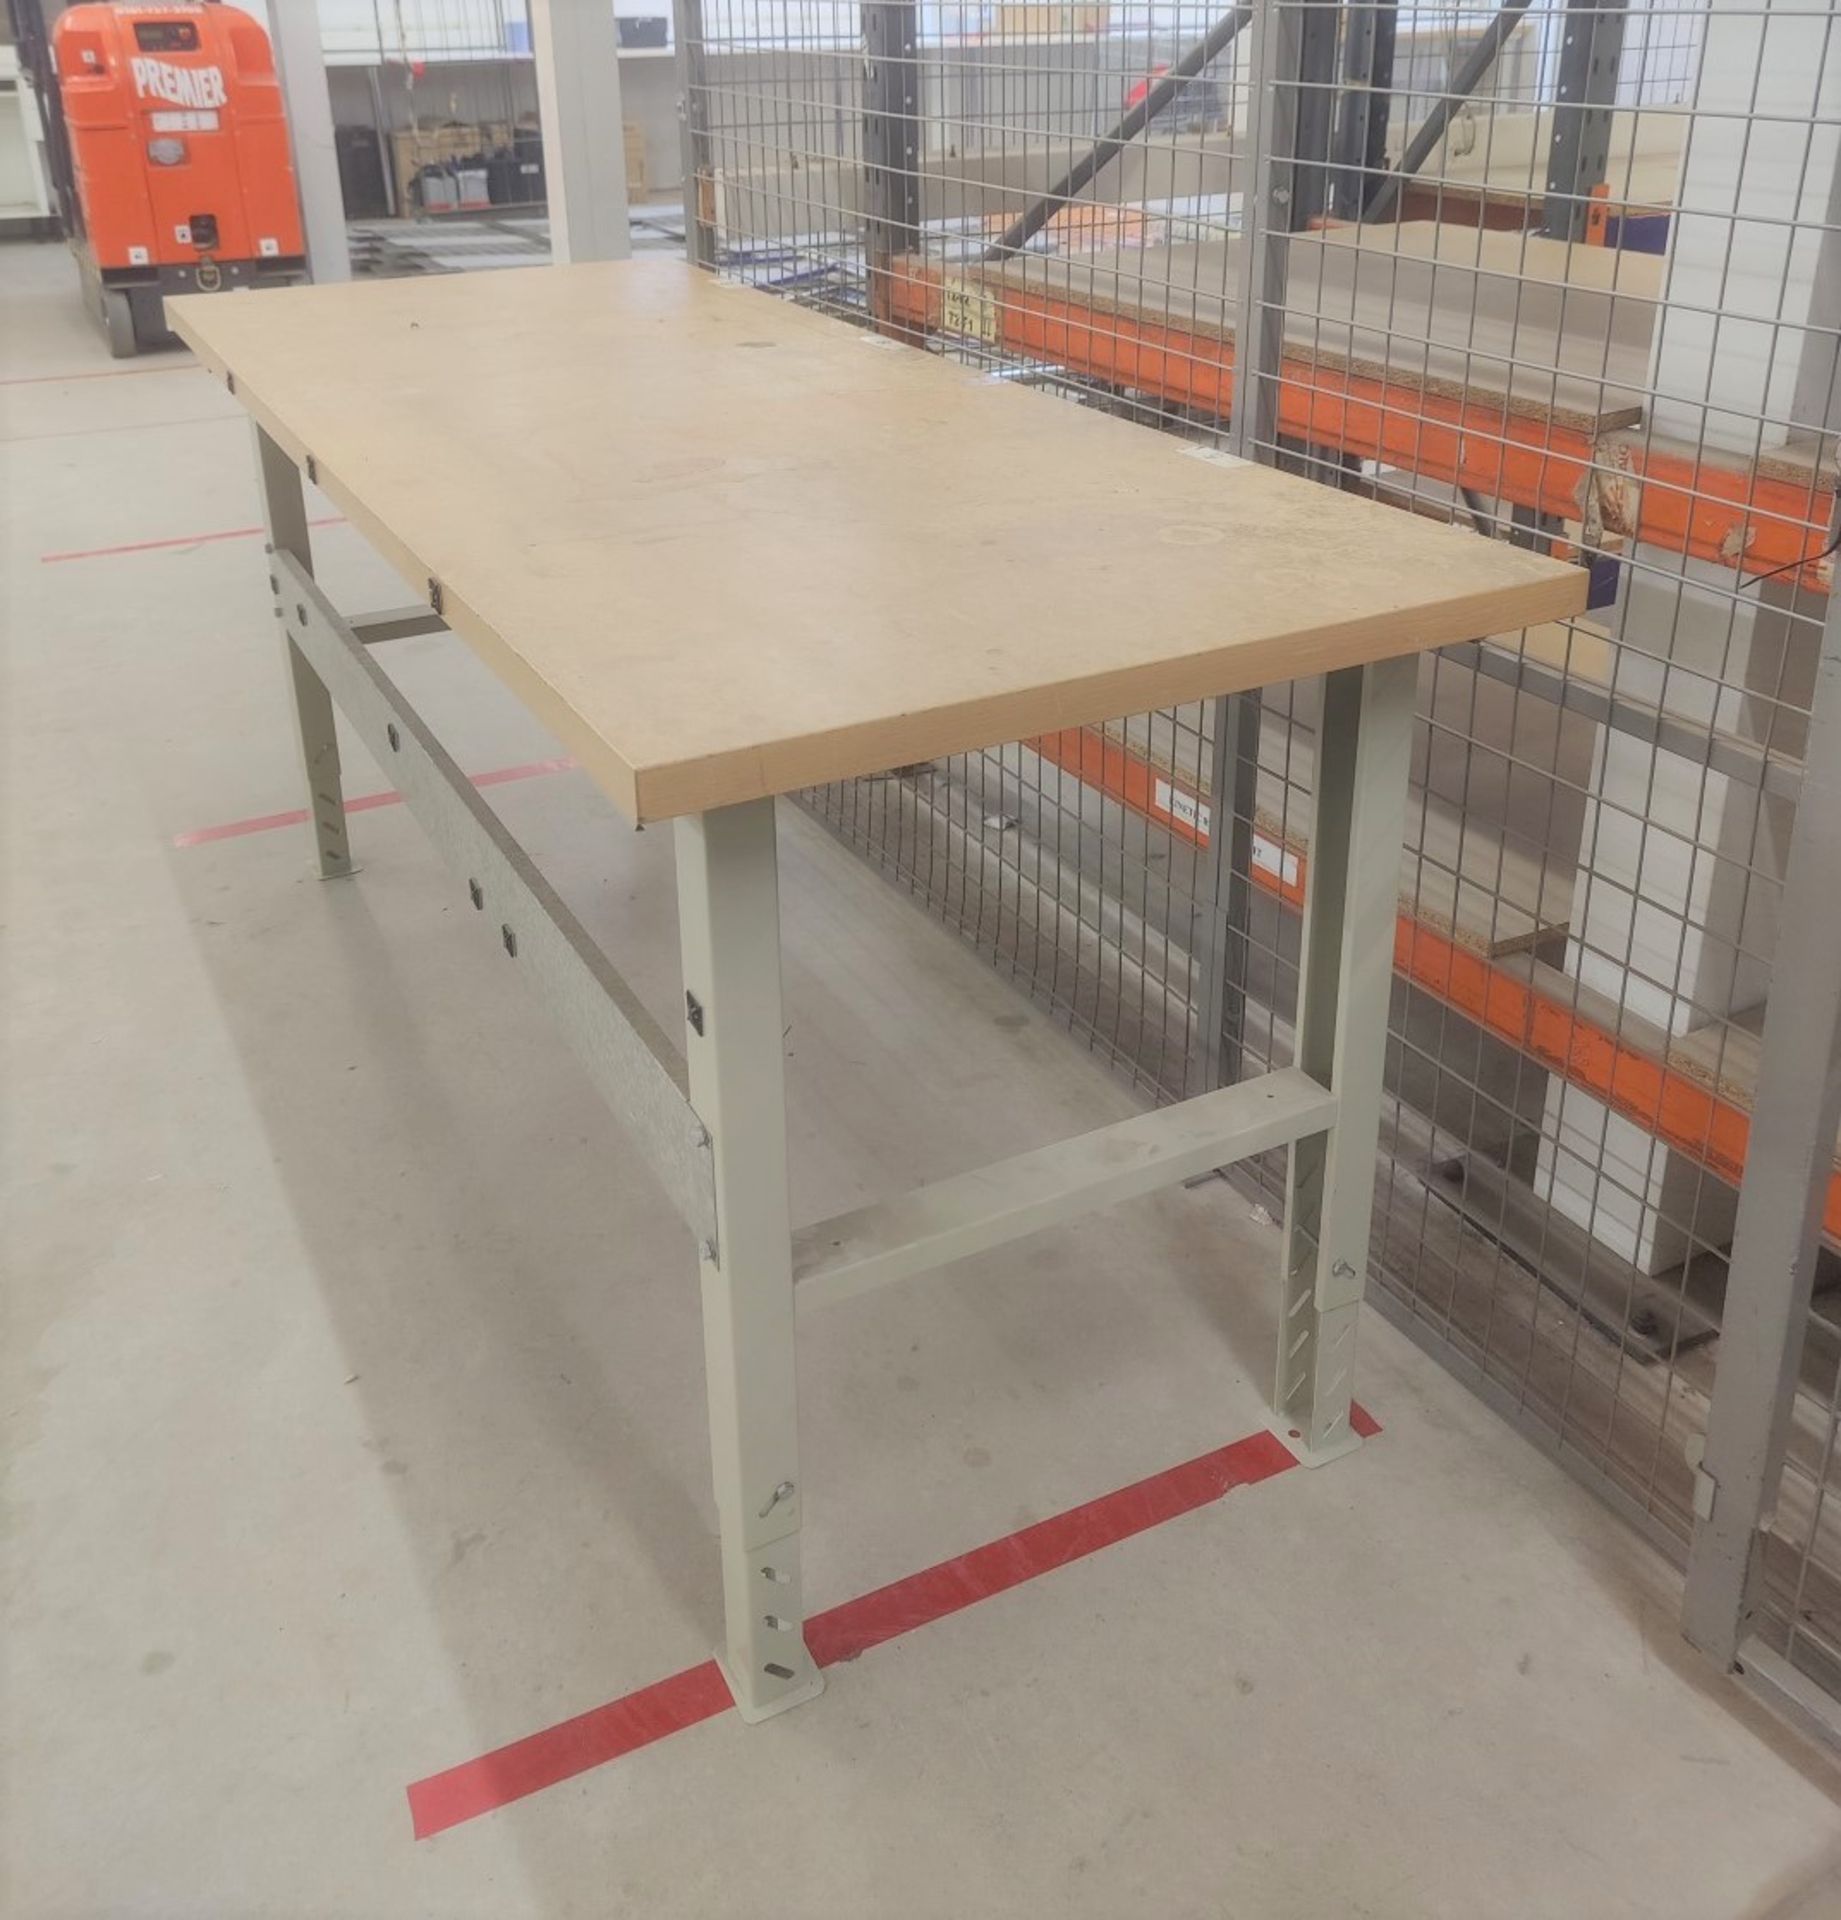 1 x Workbench With Height Adjustable Legs - Removed From a Computer Workshop - Size: W200 x D80 cms - Image 5 of 6